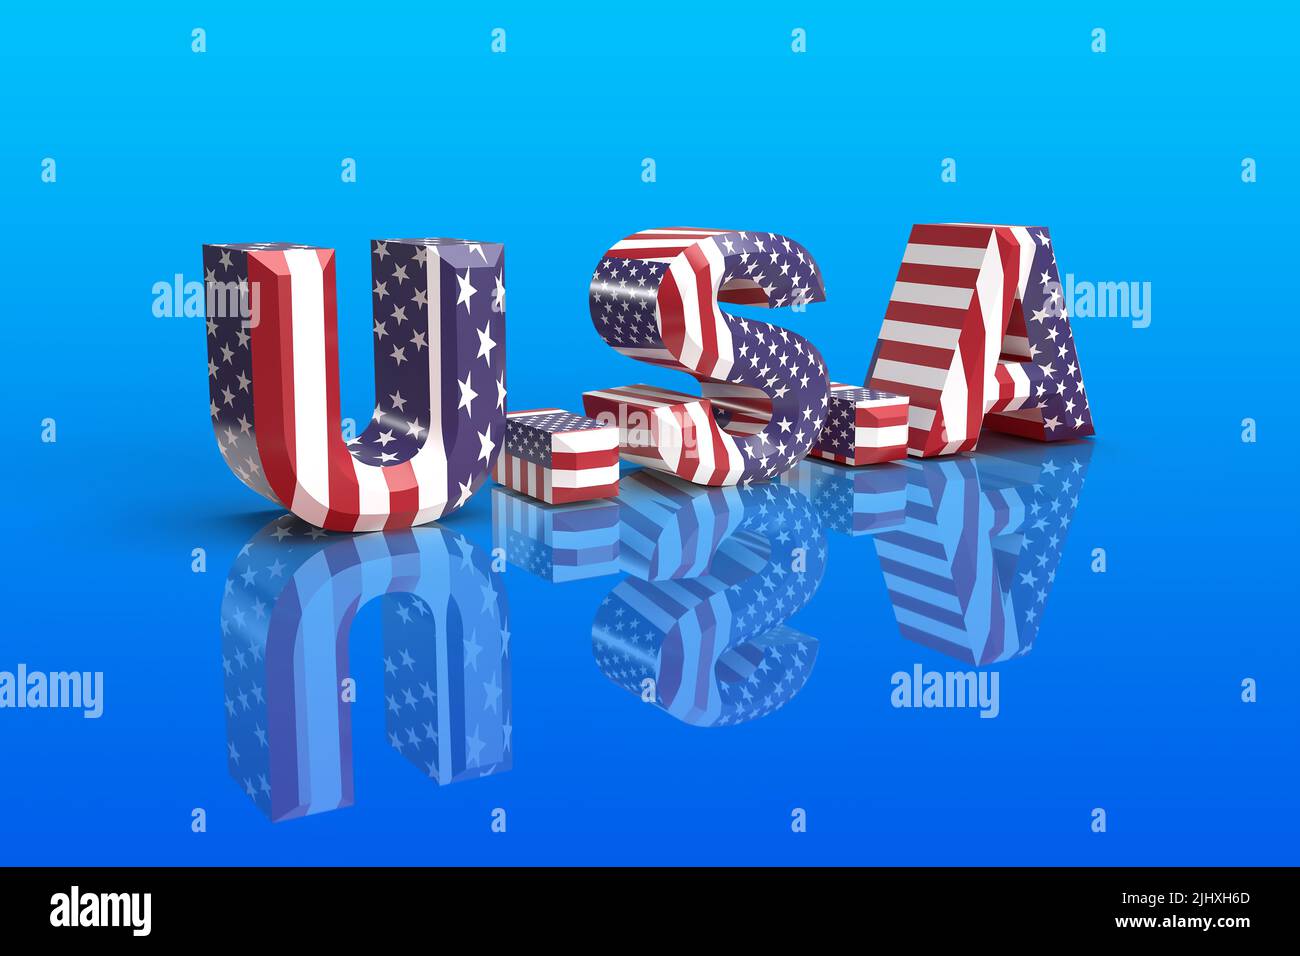 U.S.A 3D render with Stars and Stripes on a blue background Stock Photo